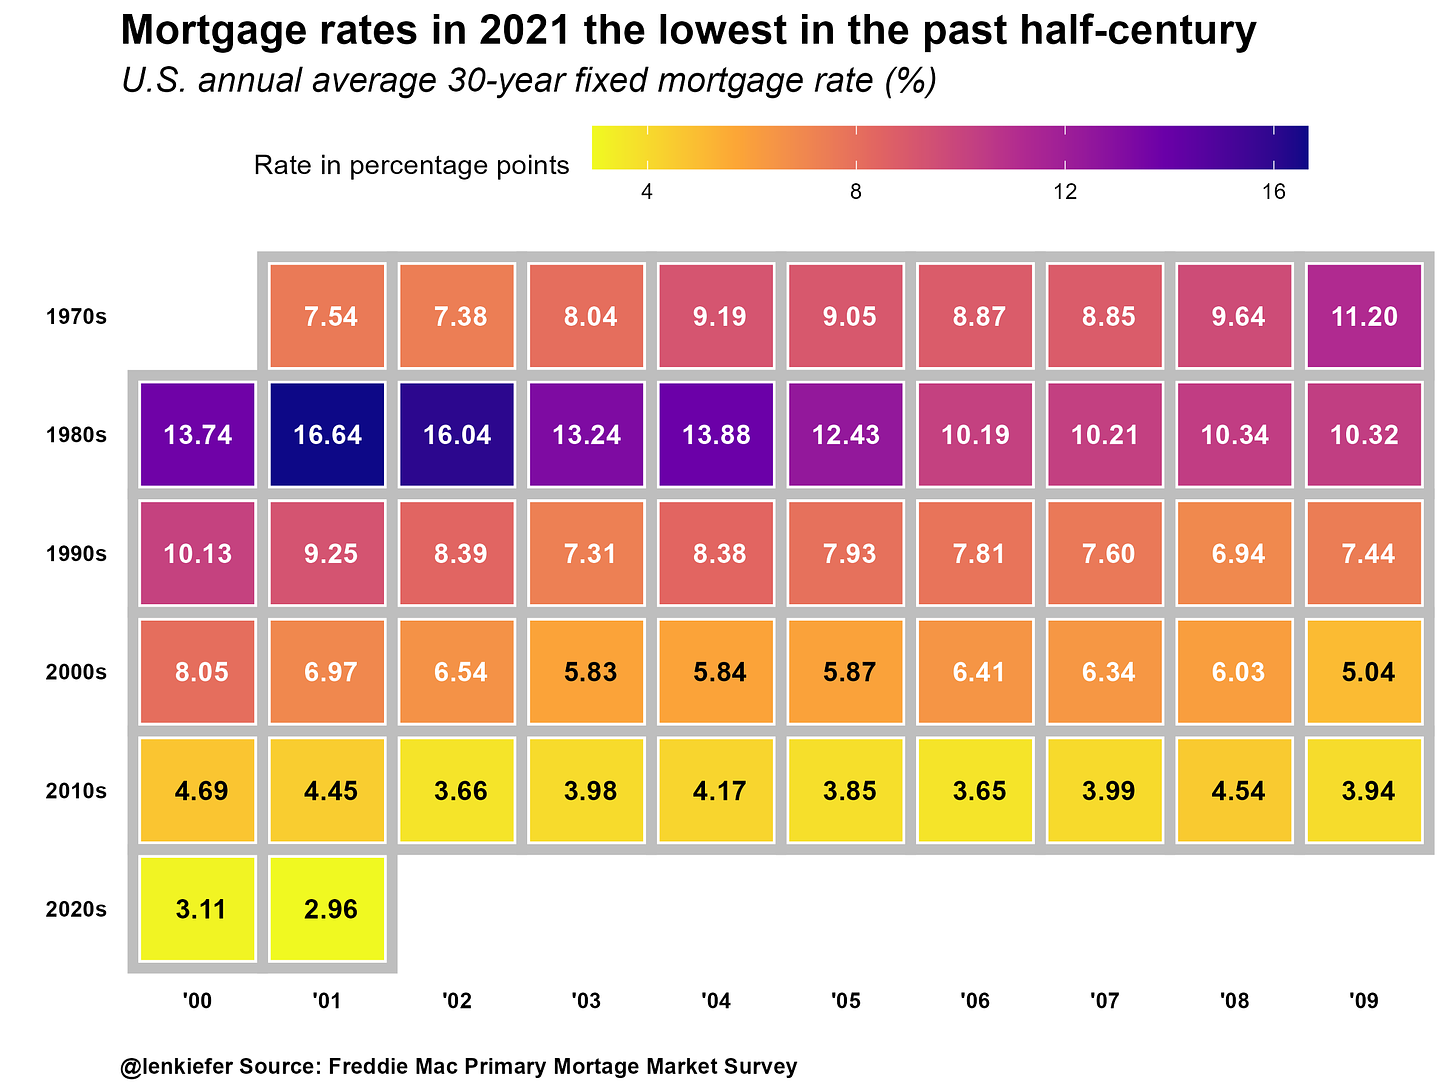 Chart of annual US 30-year fixed mortgage rates 1971-2021. Data source: Freddie Mac Primary Mortgage Market Survey